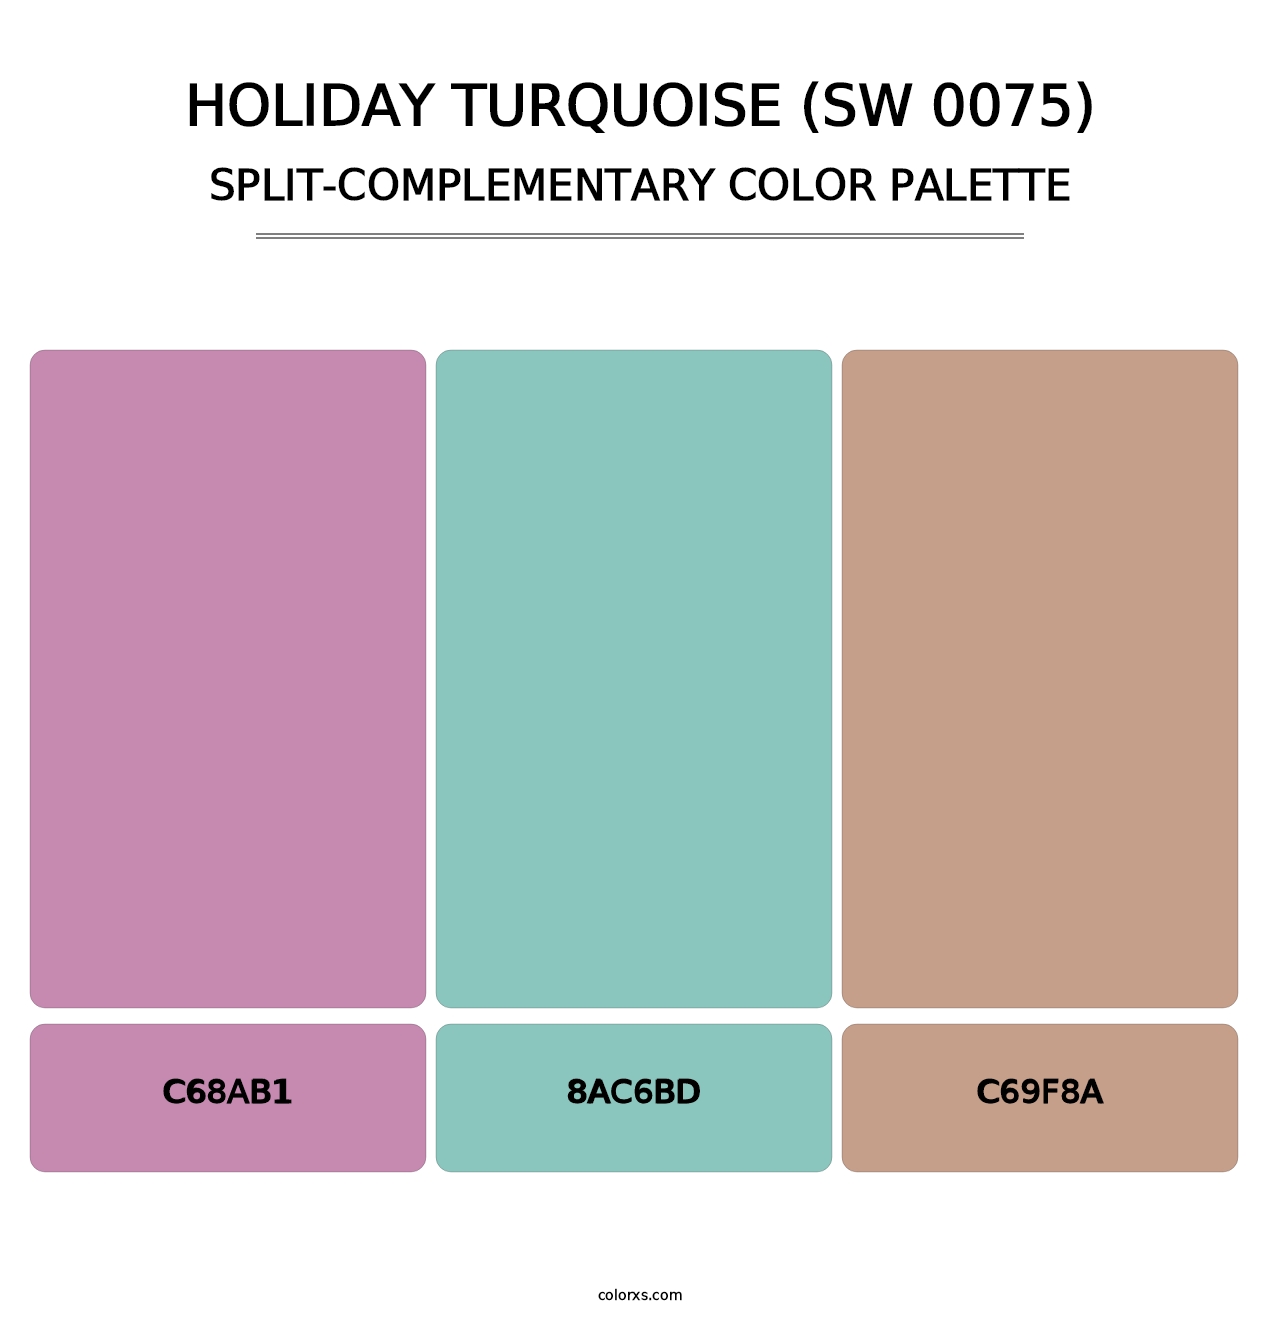 Holiday Turquoise (SW 0075) - Split-Complementary Color Palette